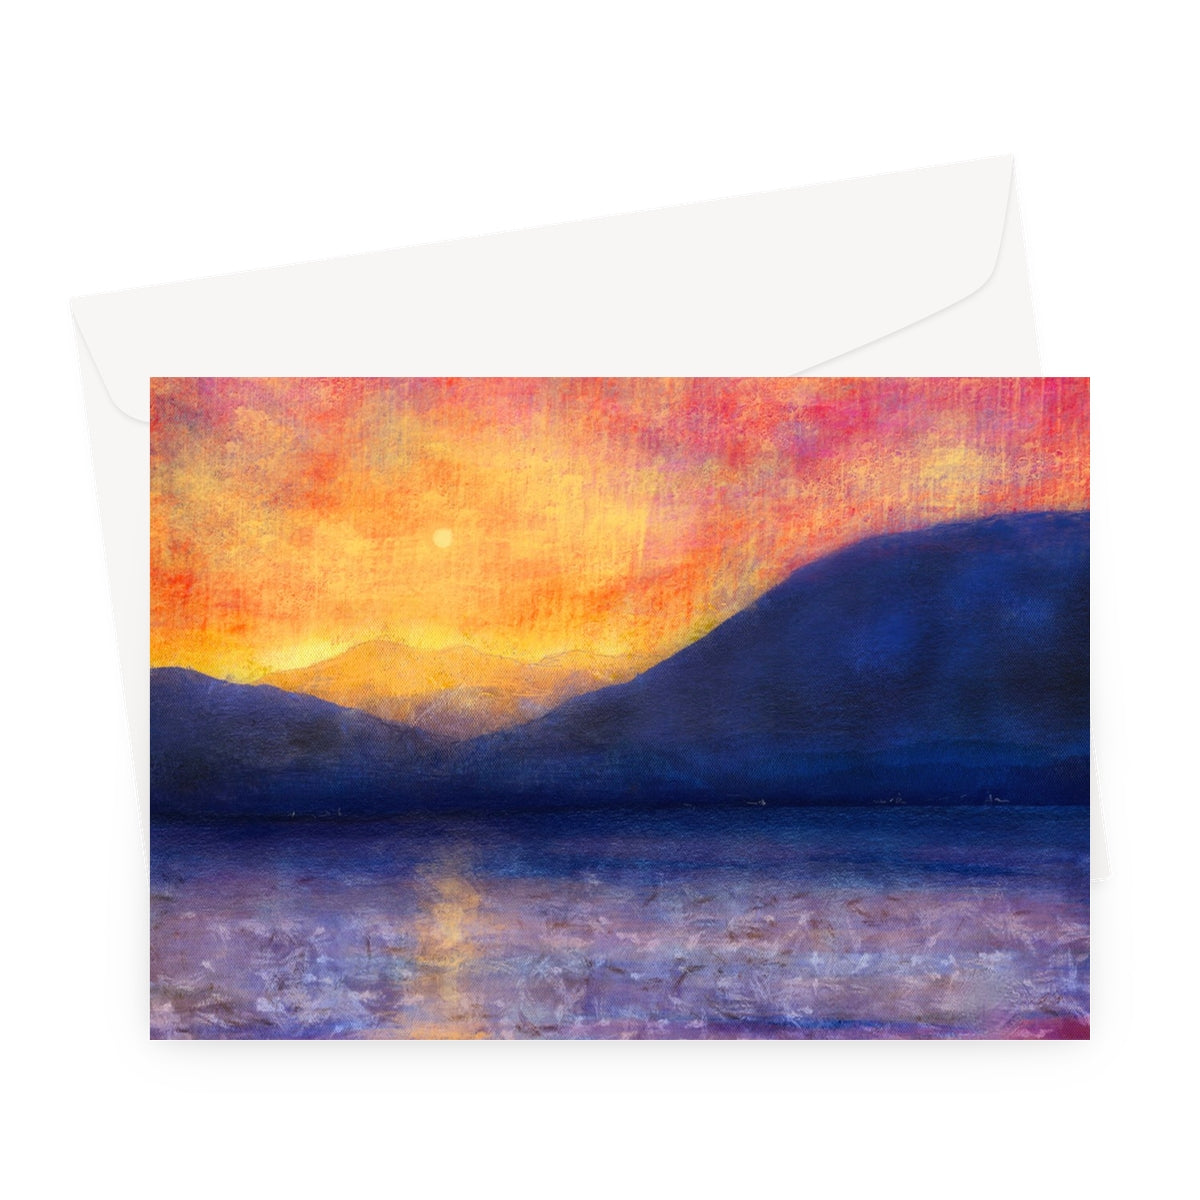 Sunset Approaching Mull Art Gifts Greeting Card-Greetings Cards-Hebridean Islands Art Gallery-A5 Landscape-1 Card-Paintings, Prints, Homeware, Art Gifts From Scotland By Scottish Artist Kevin Hunter